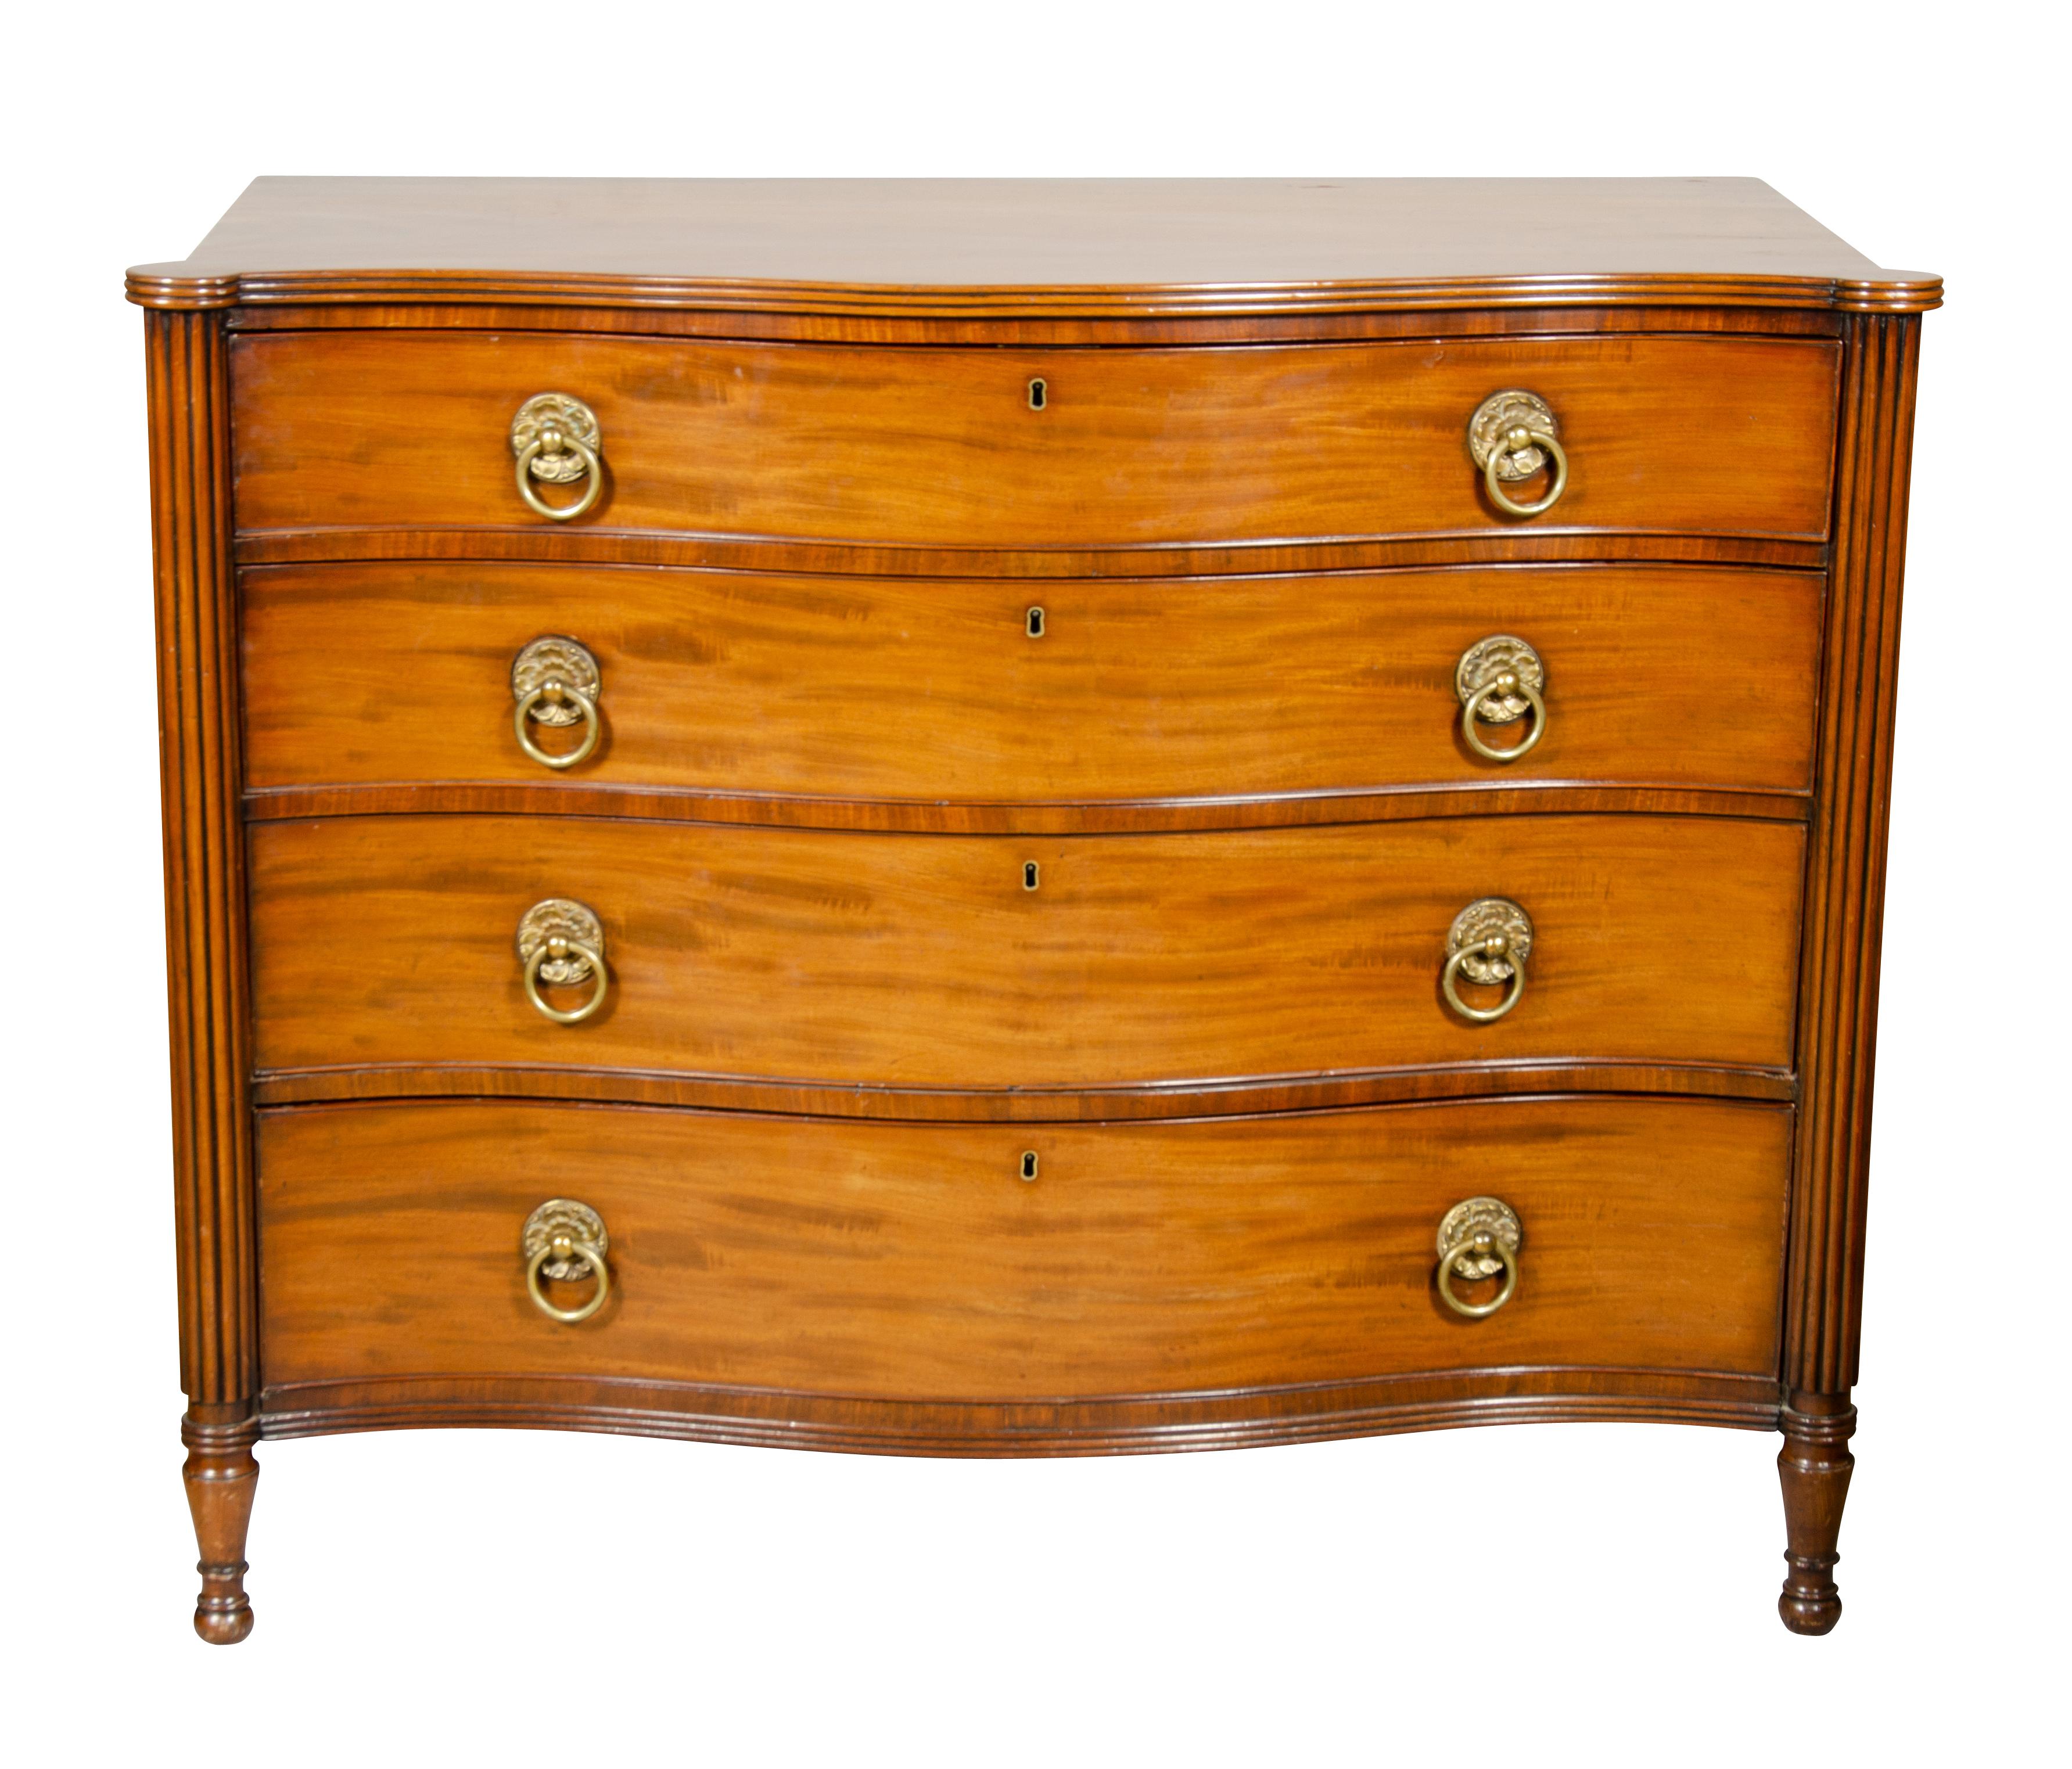 Serpentine top over four graduated drawers flanked by reeded columns. Brass ring handles on drawers , raised on circular turned tapered legs.